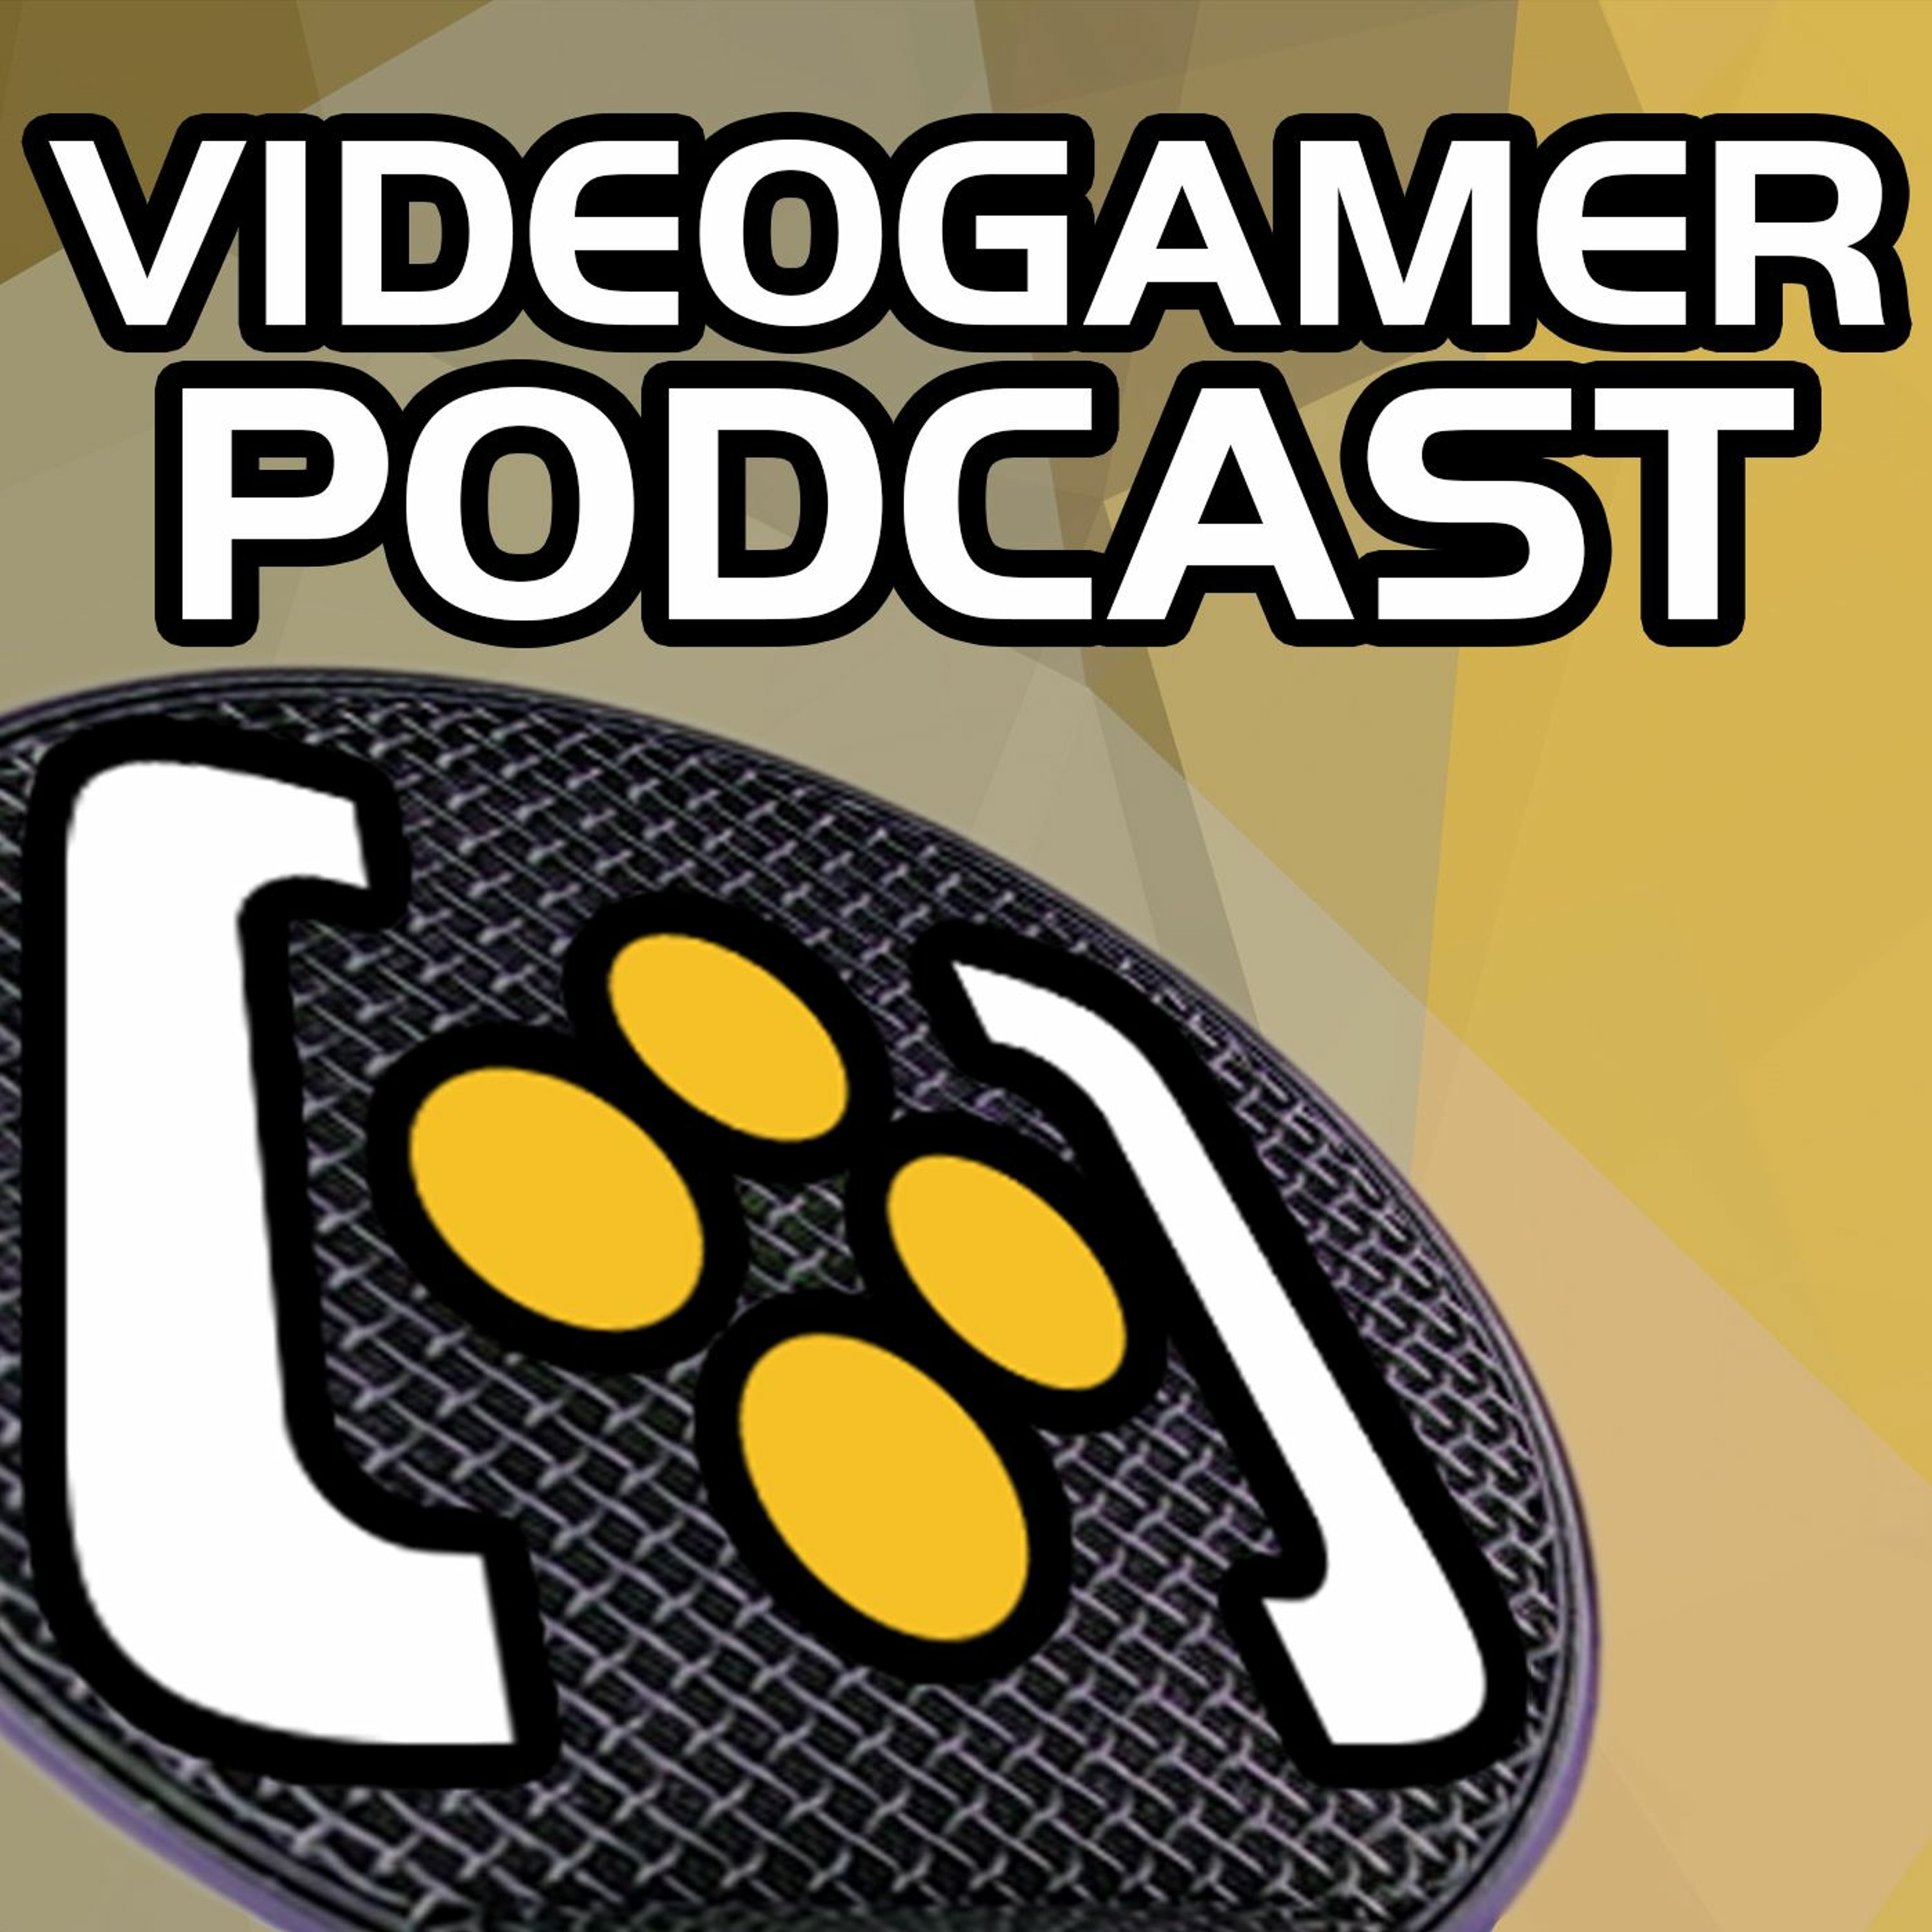 VideoGamer Podcast #493: Upscaled Resolutions